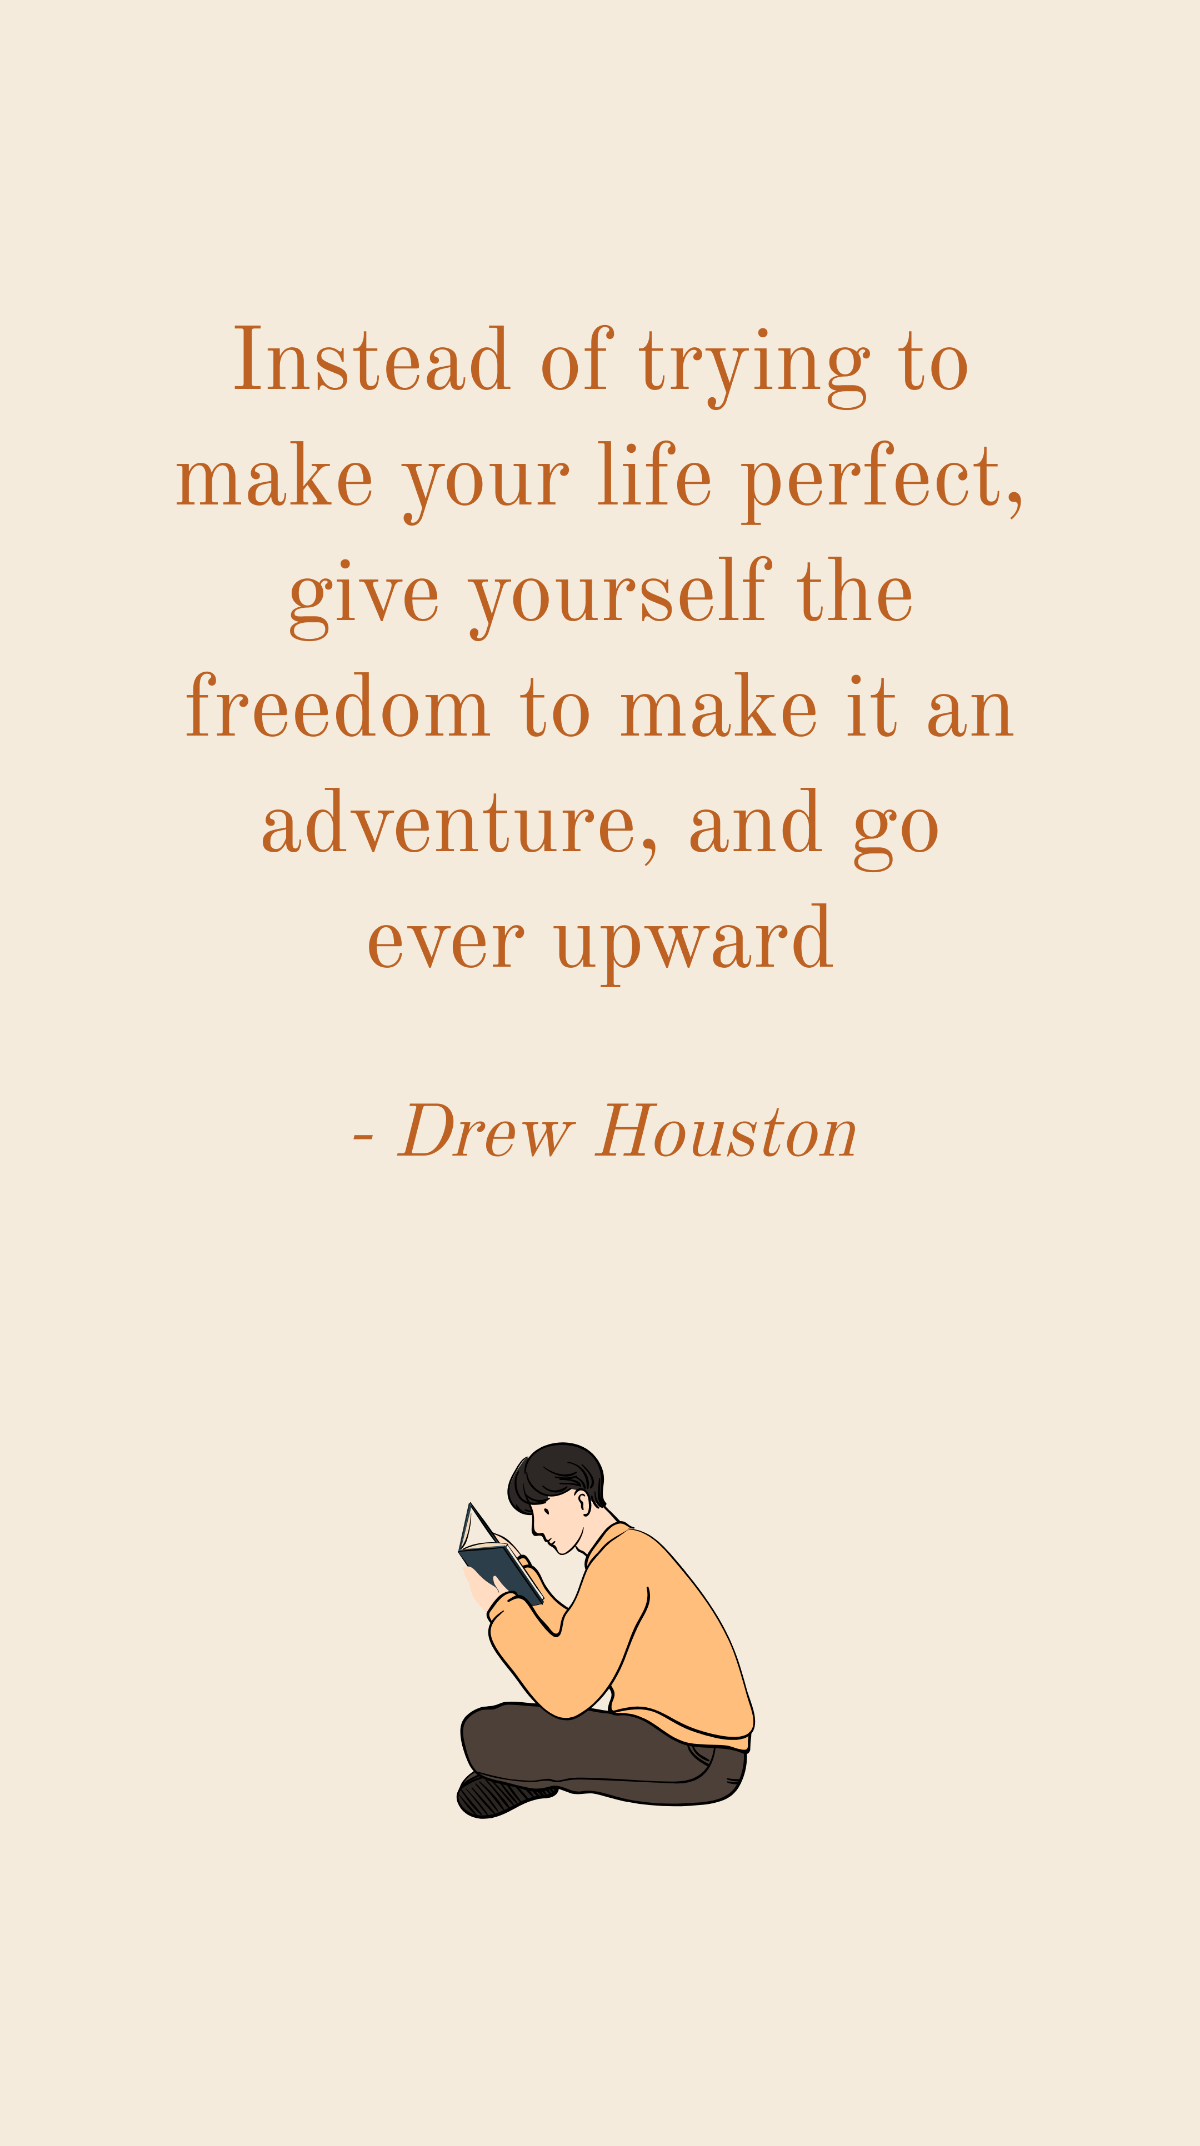 Drew Houston - Instead of trying to make your life perfect, give yourself the freedom to make it an adventure, and go ever upward Template